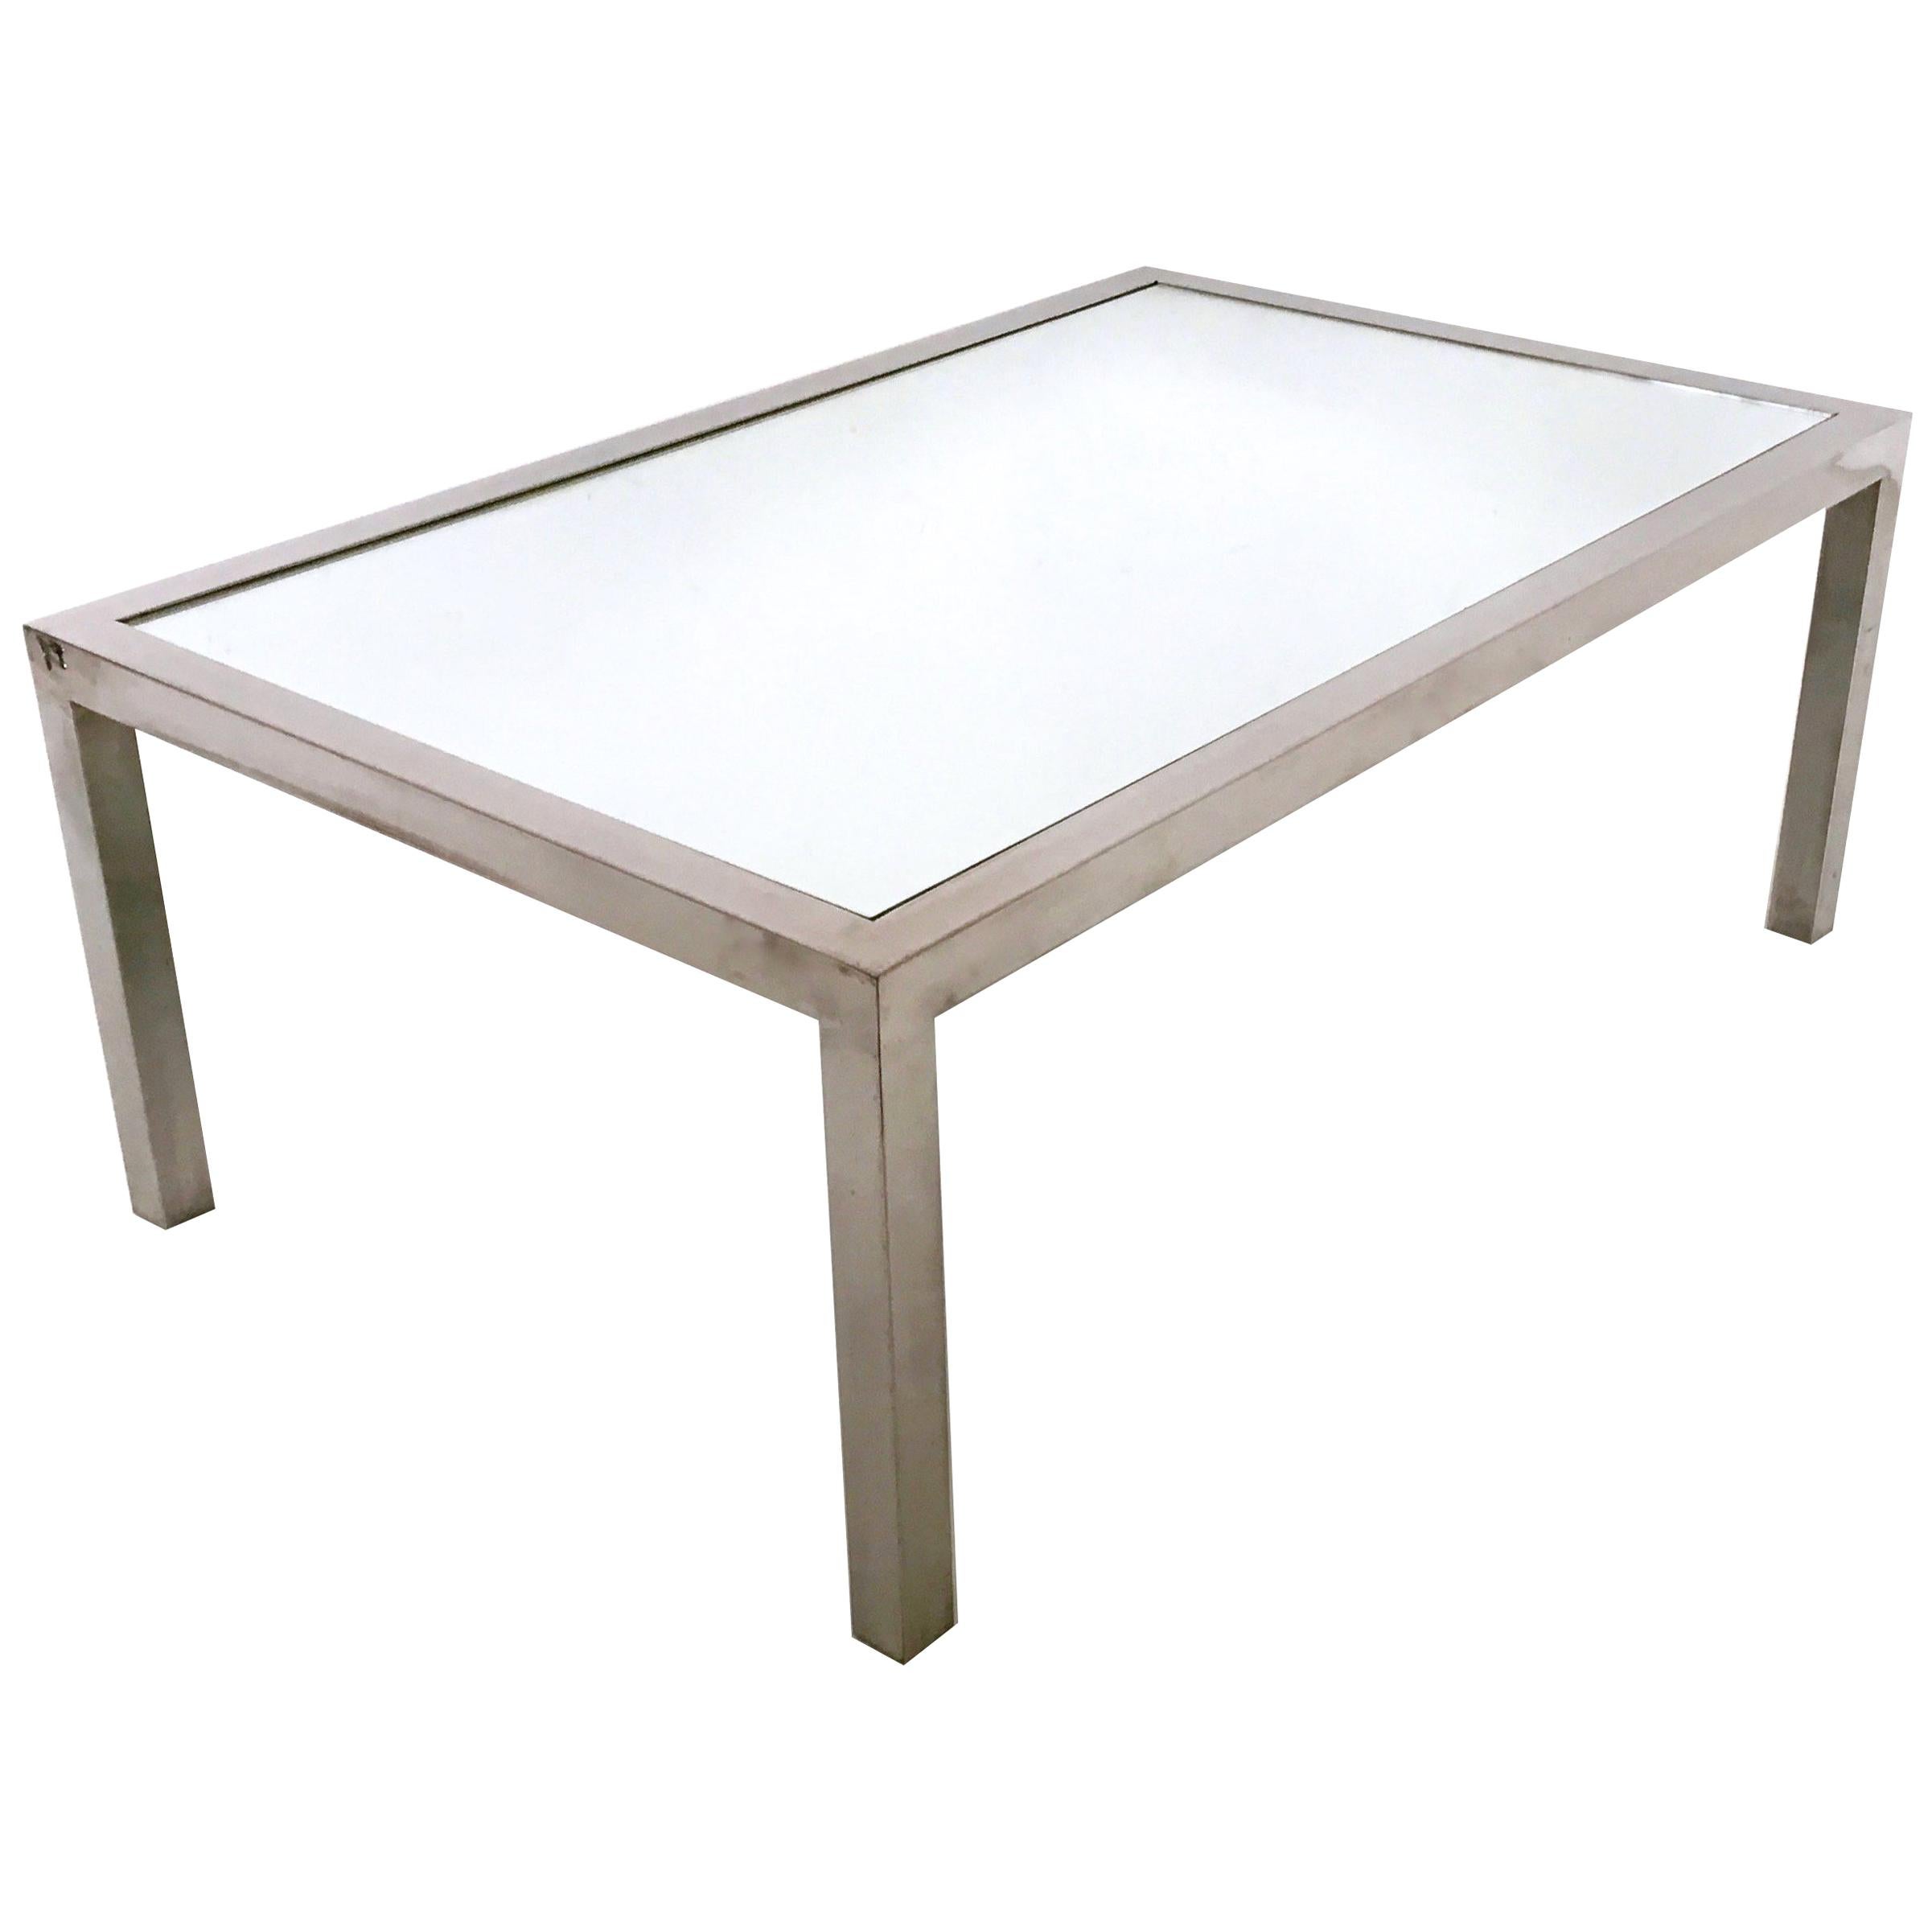 Vintage Steel Coffee Table in the Style of Nanda Vigo with a Mirrored Top, Italy